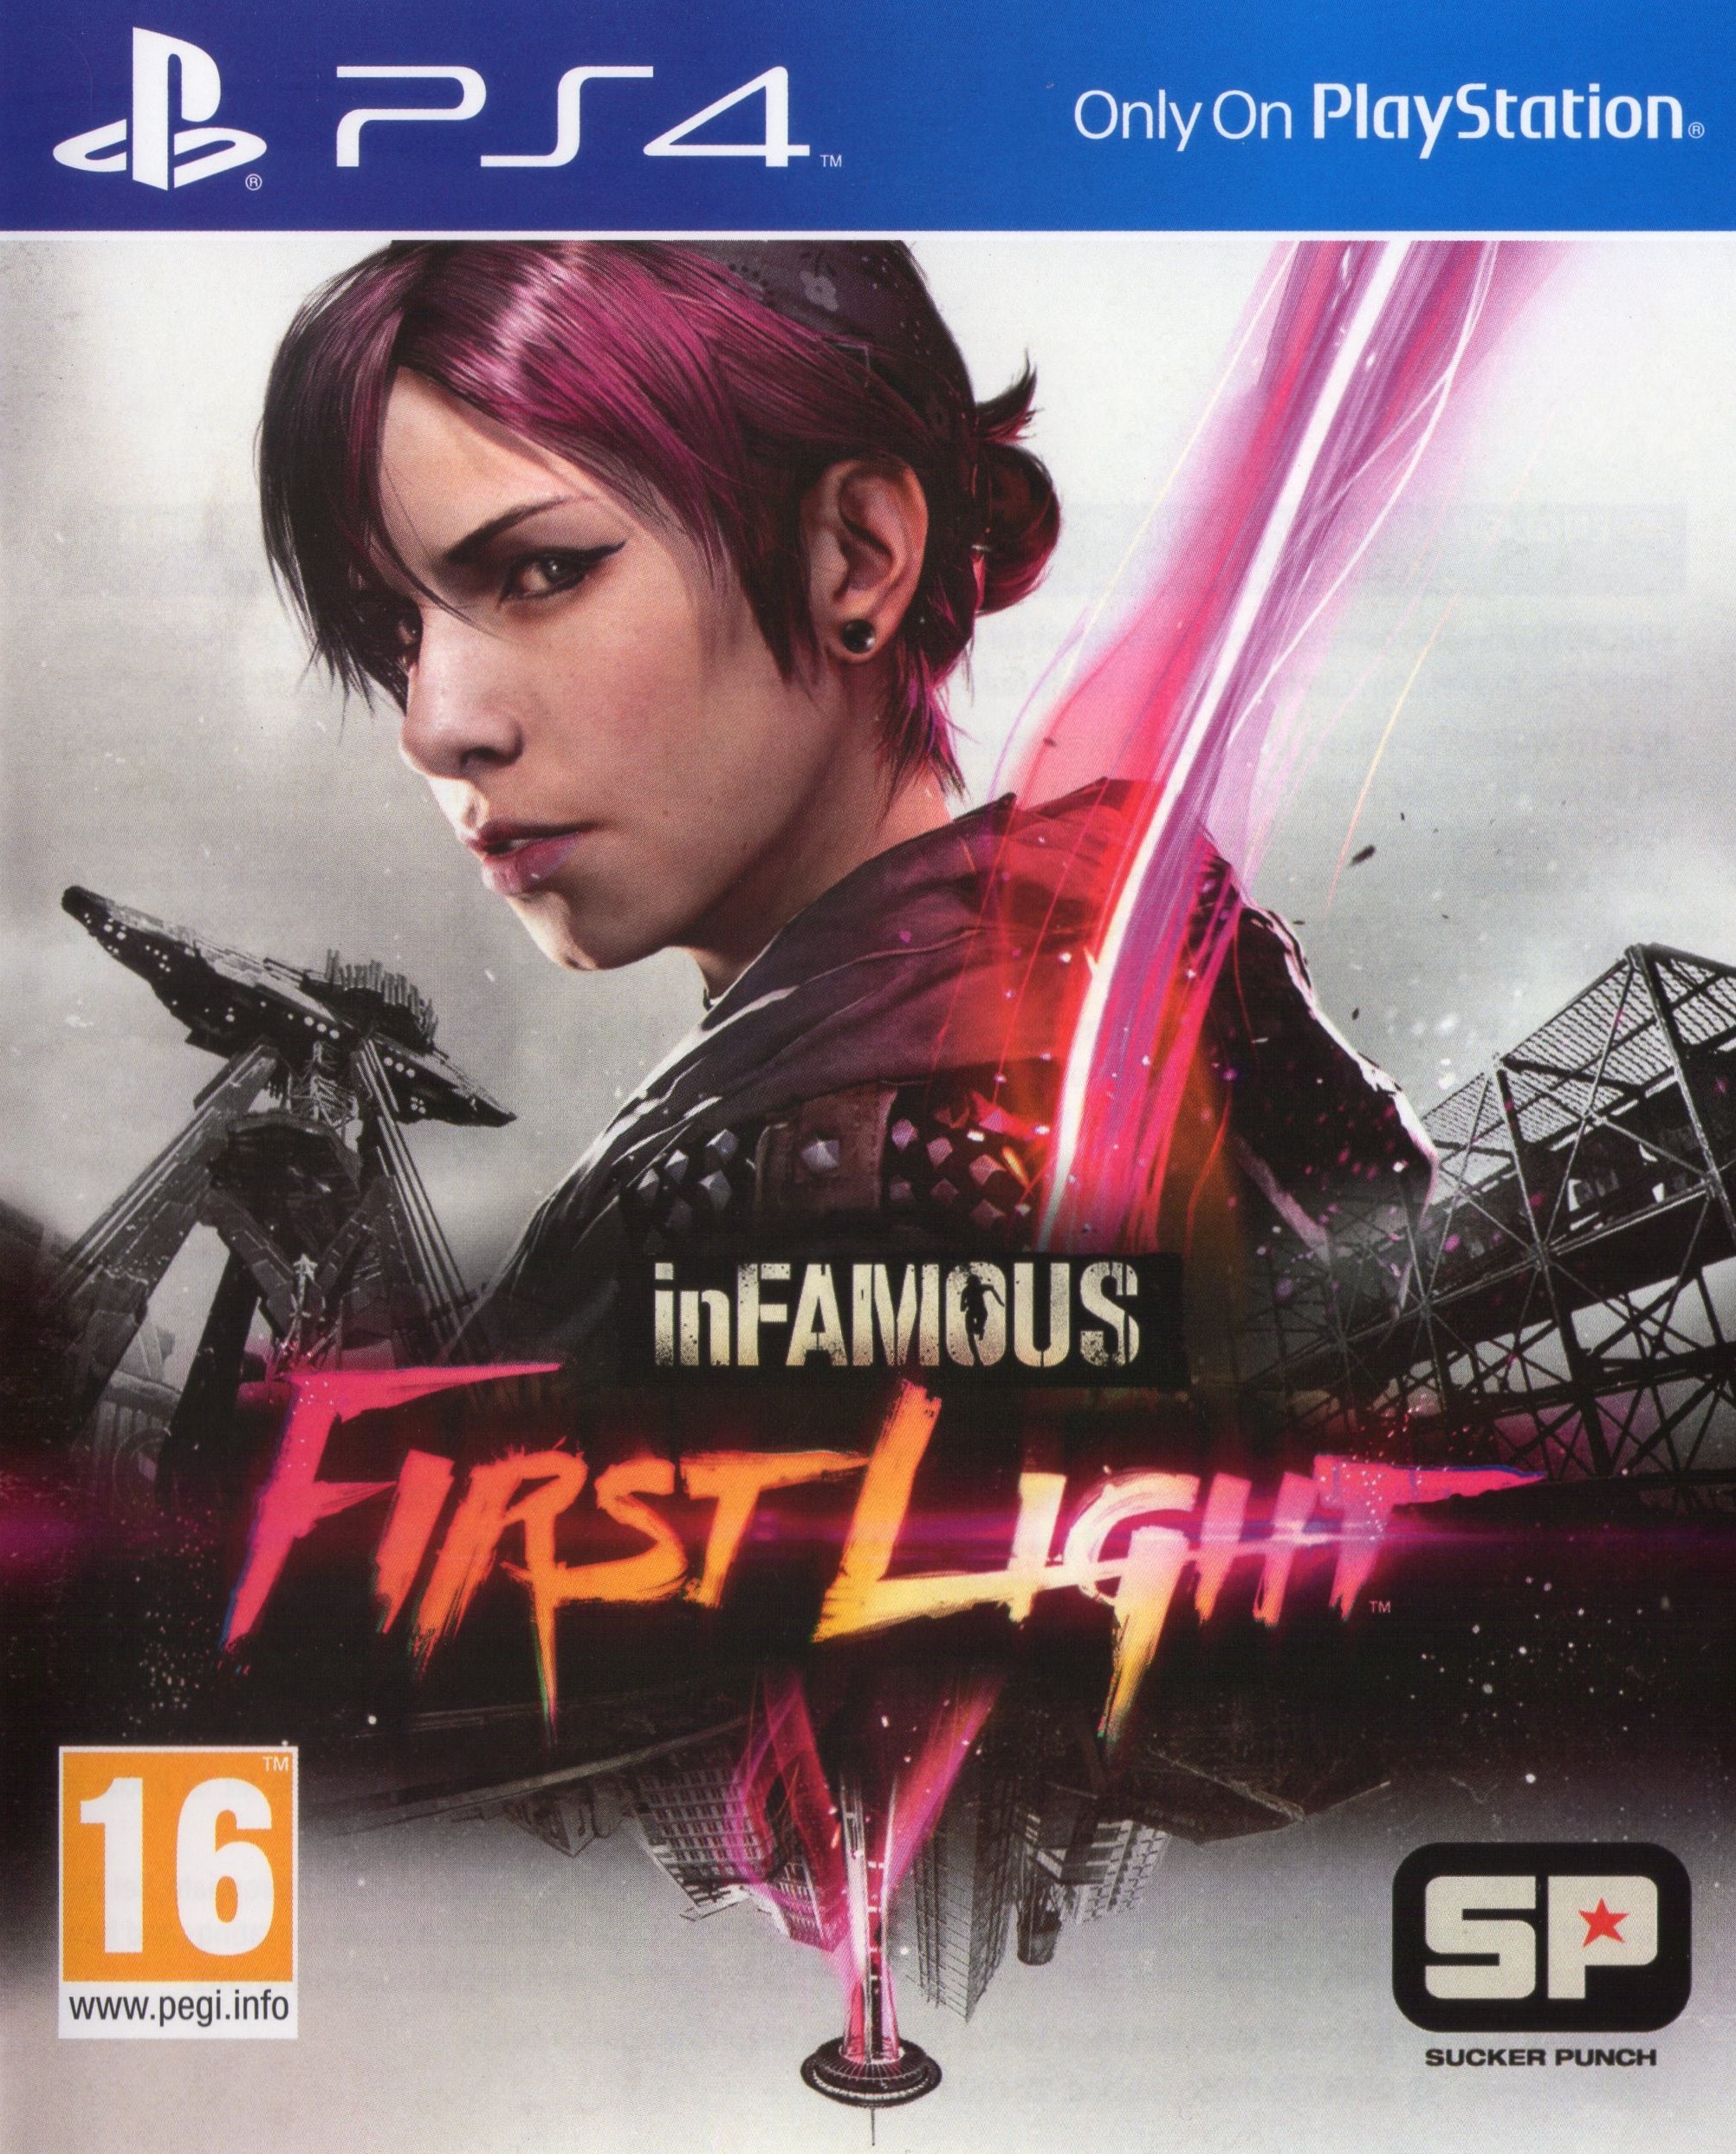 'inFamous: First Light'